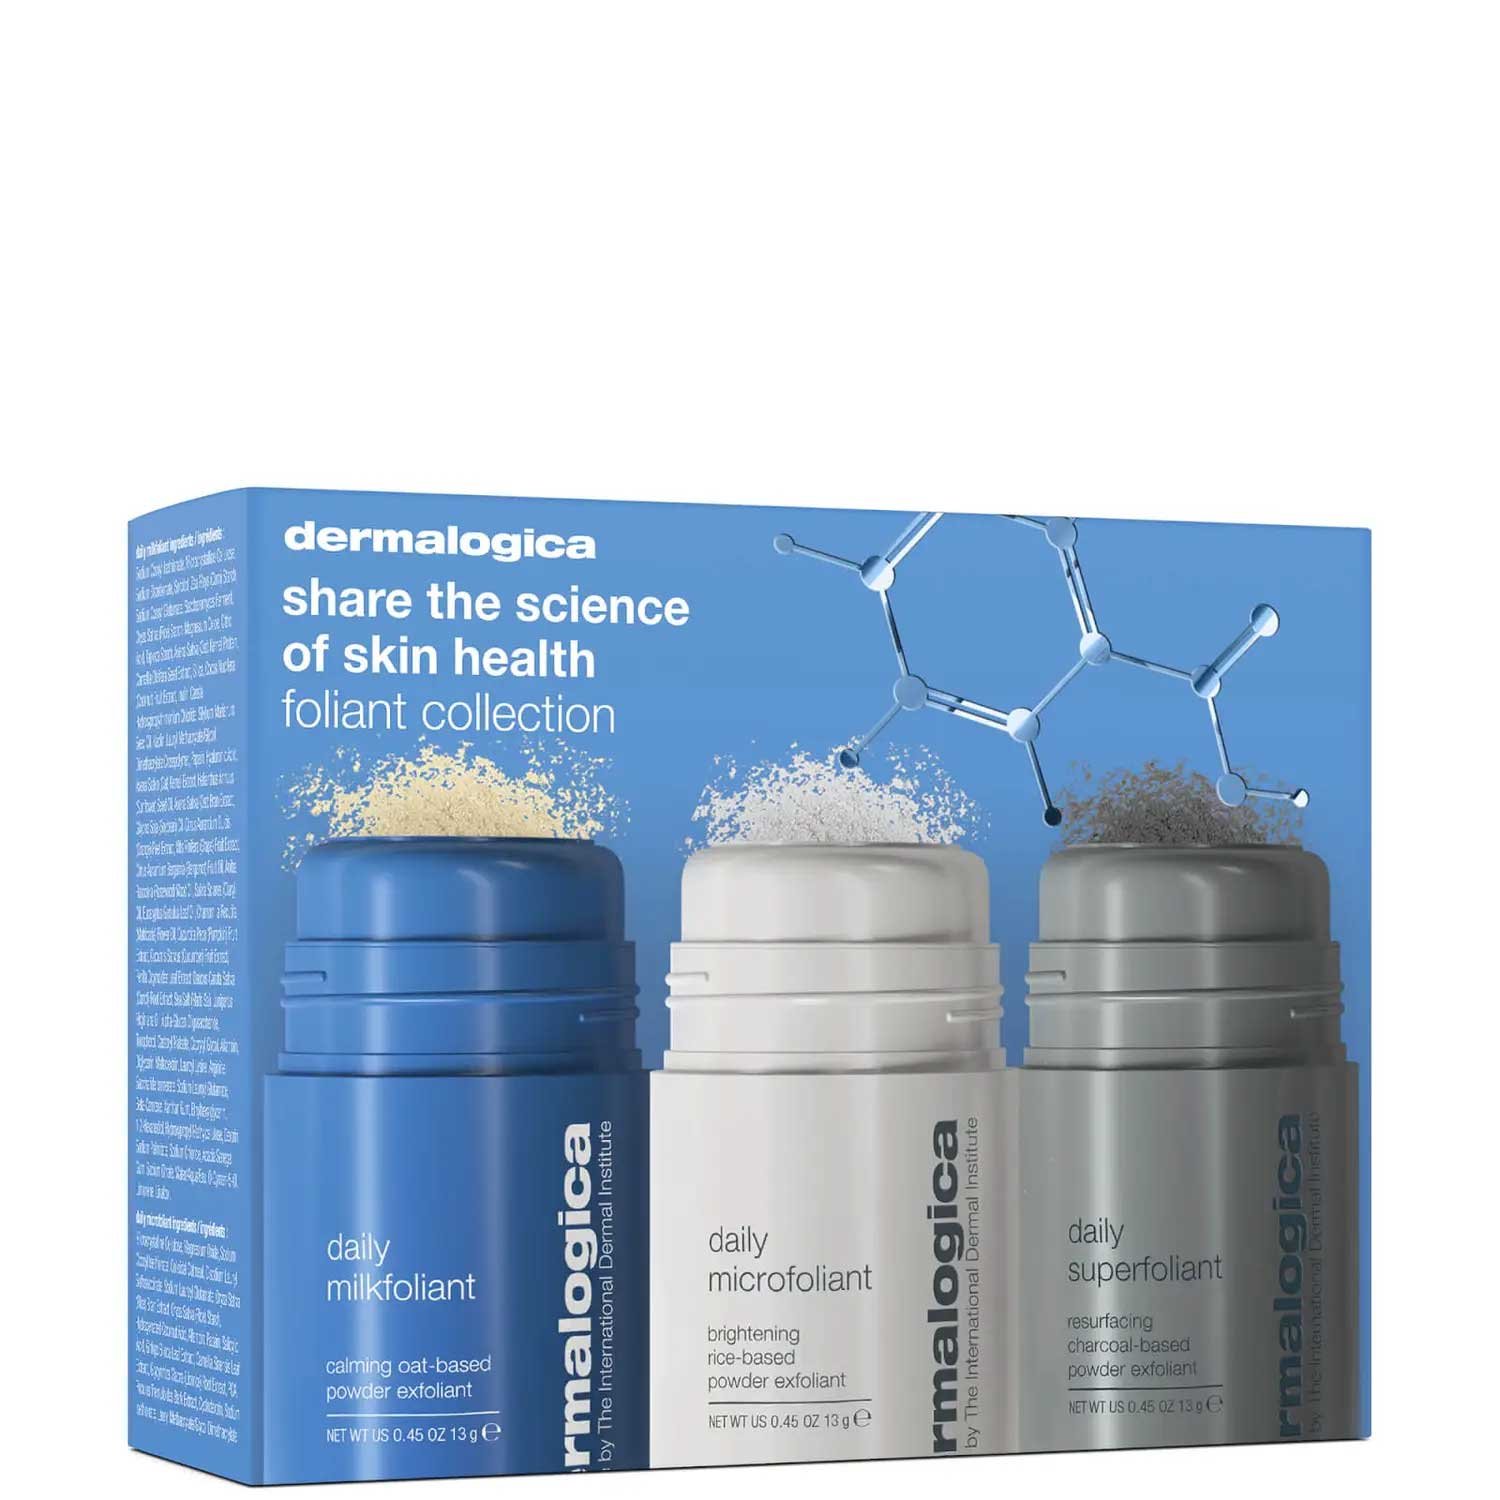 most wanted gifts for her - top beauty skincare gifts coveted gifts for her - Dermalogica Foliant Collection: A Timeless Gift for Every Occasion